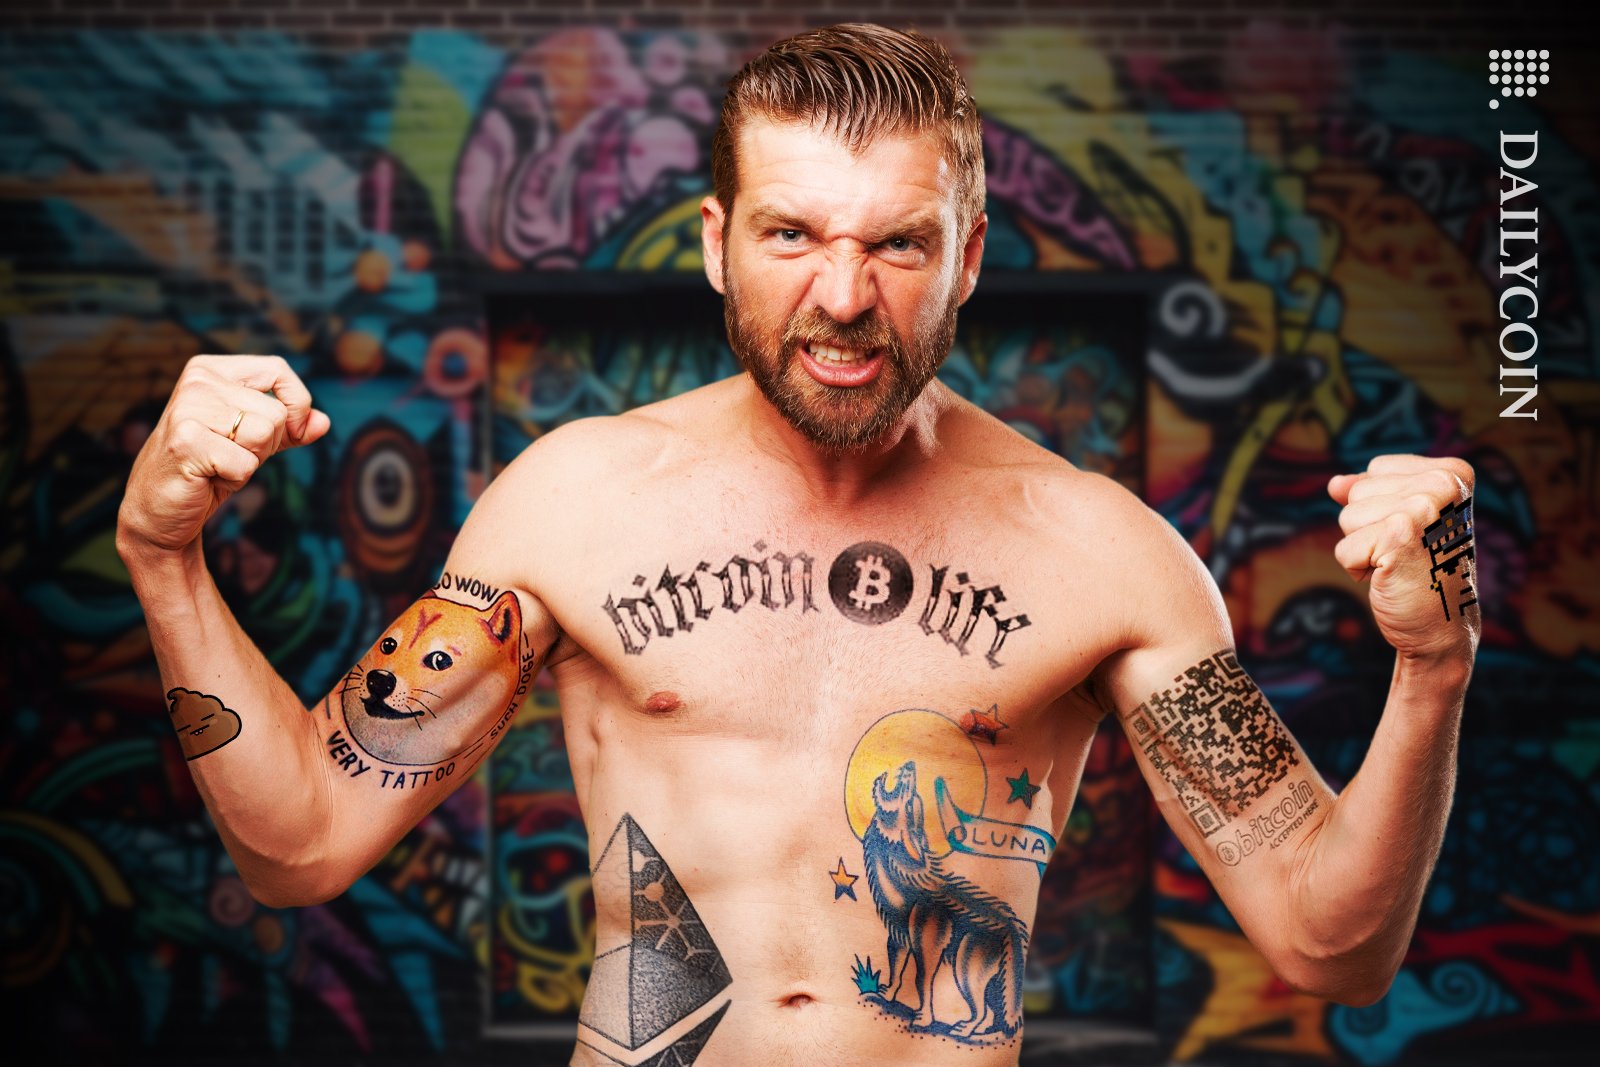 Man flexing with his crypto tattoos.